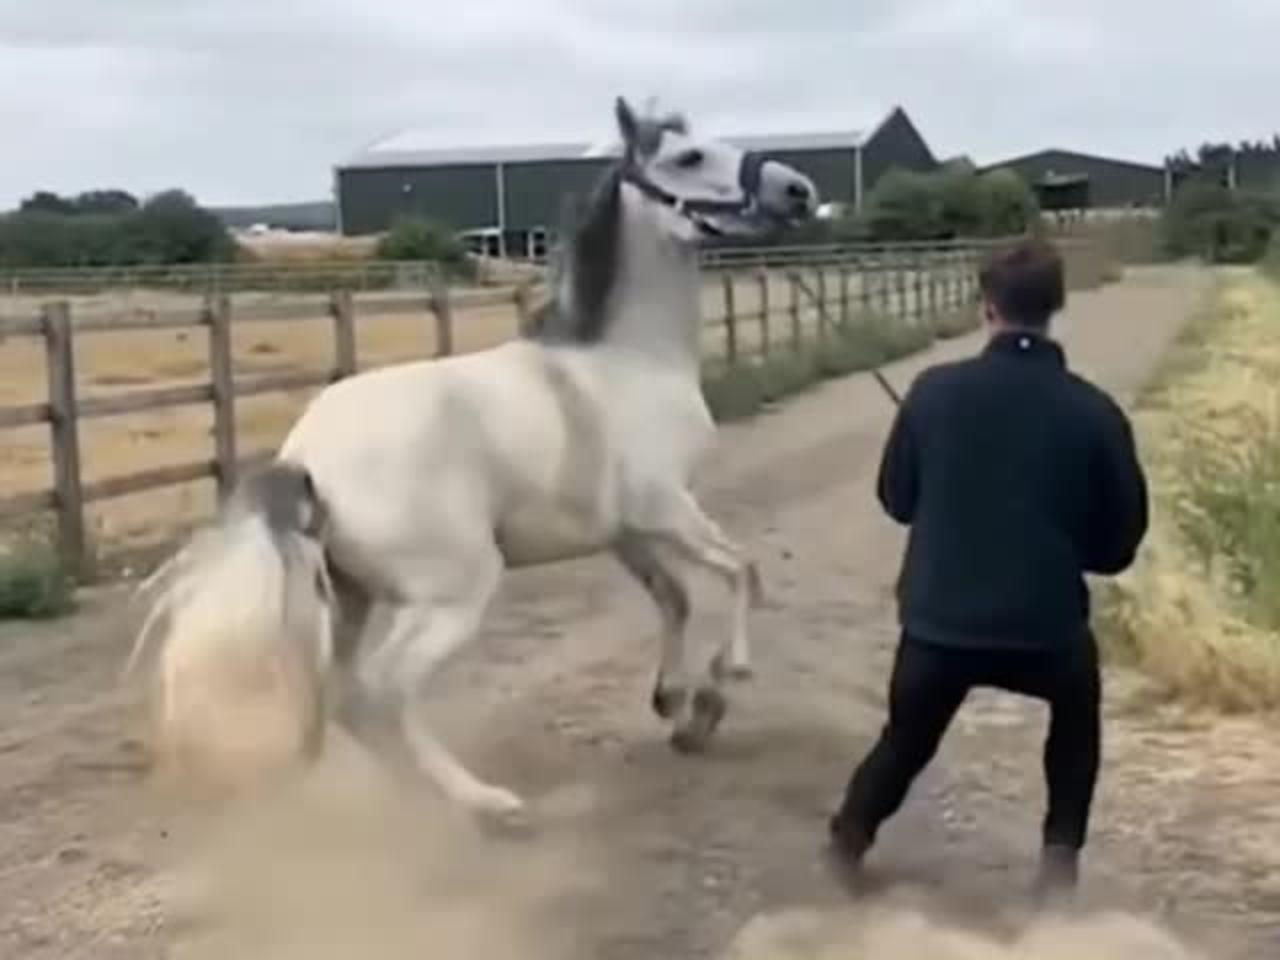 This horse has so much strength